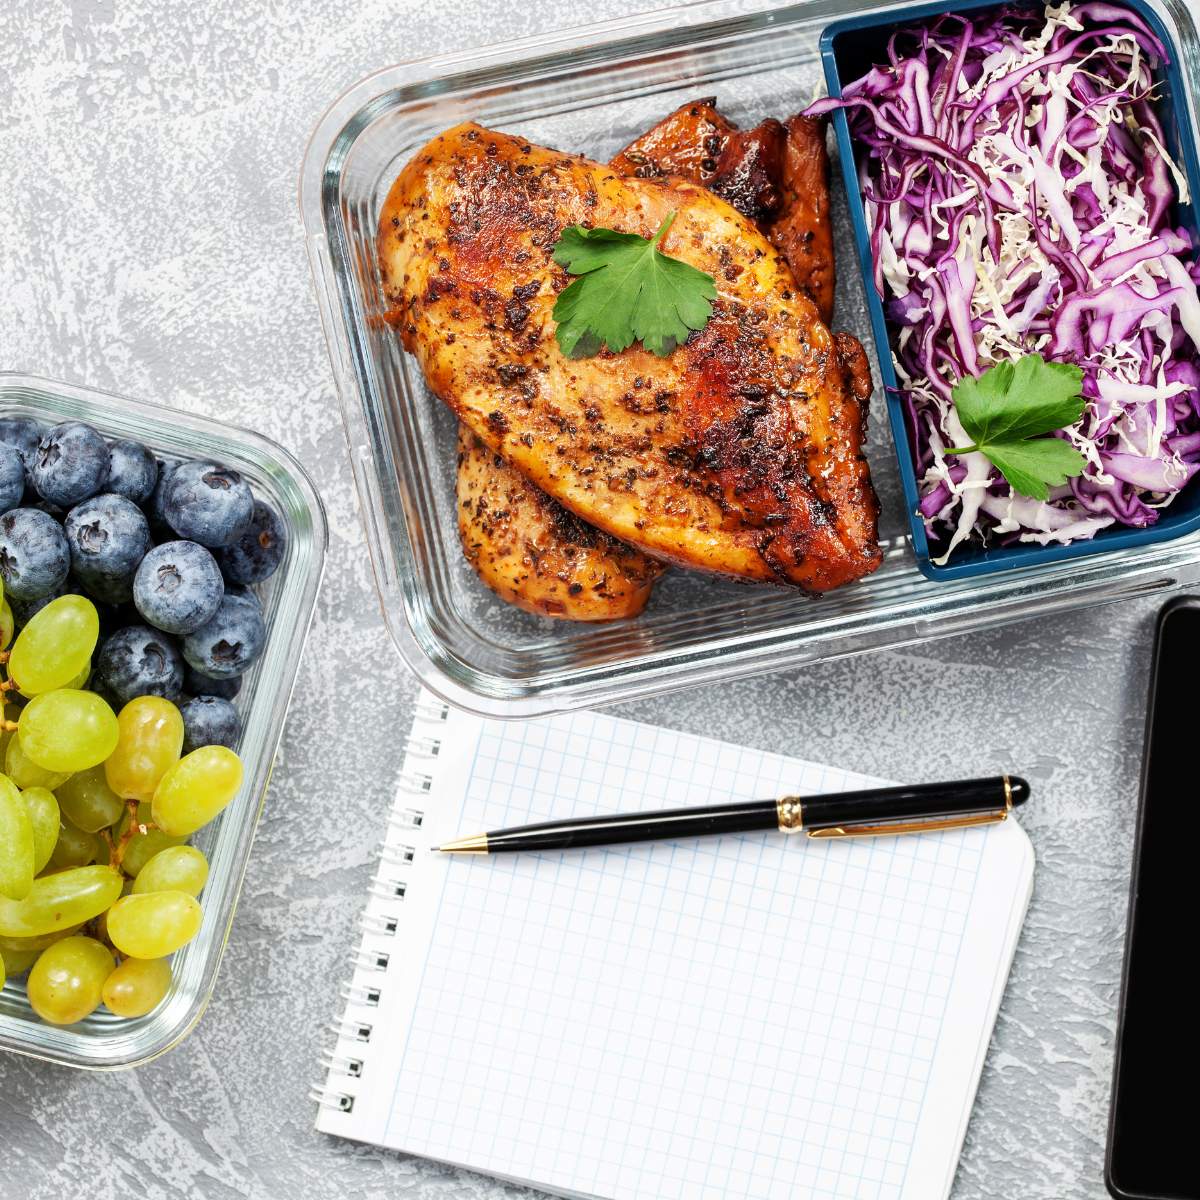 Pen and pad near prepped chicken, shredded cabbage and fruit.